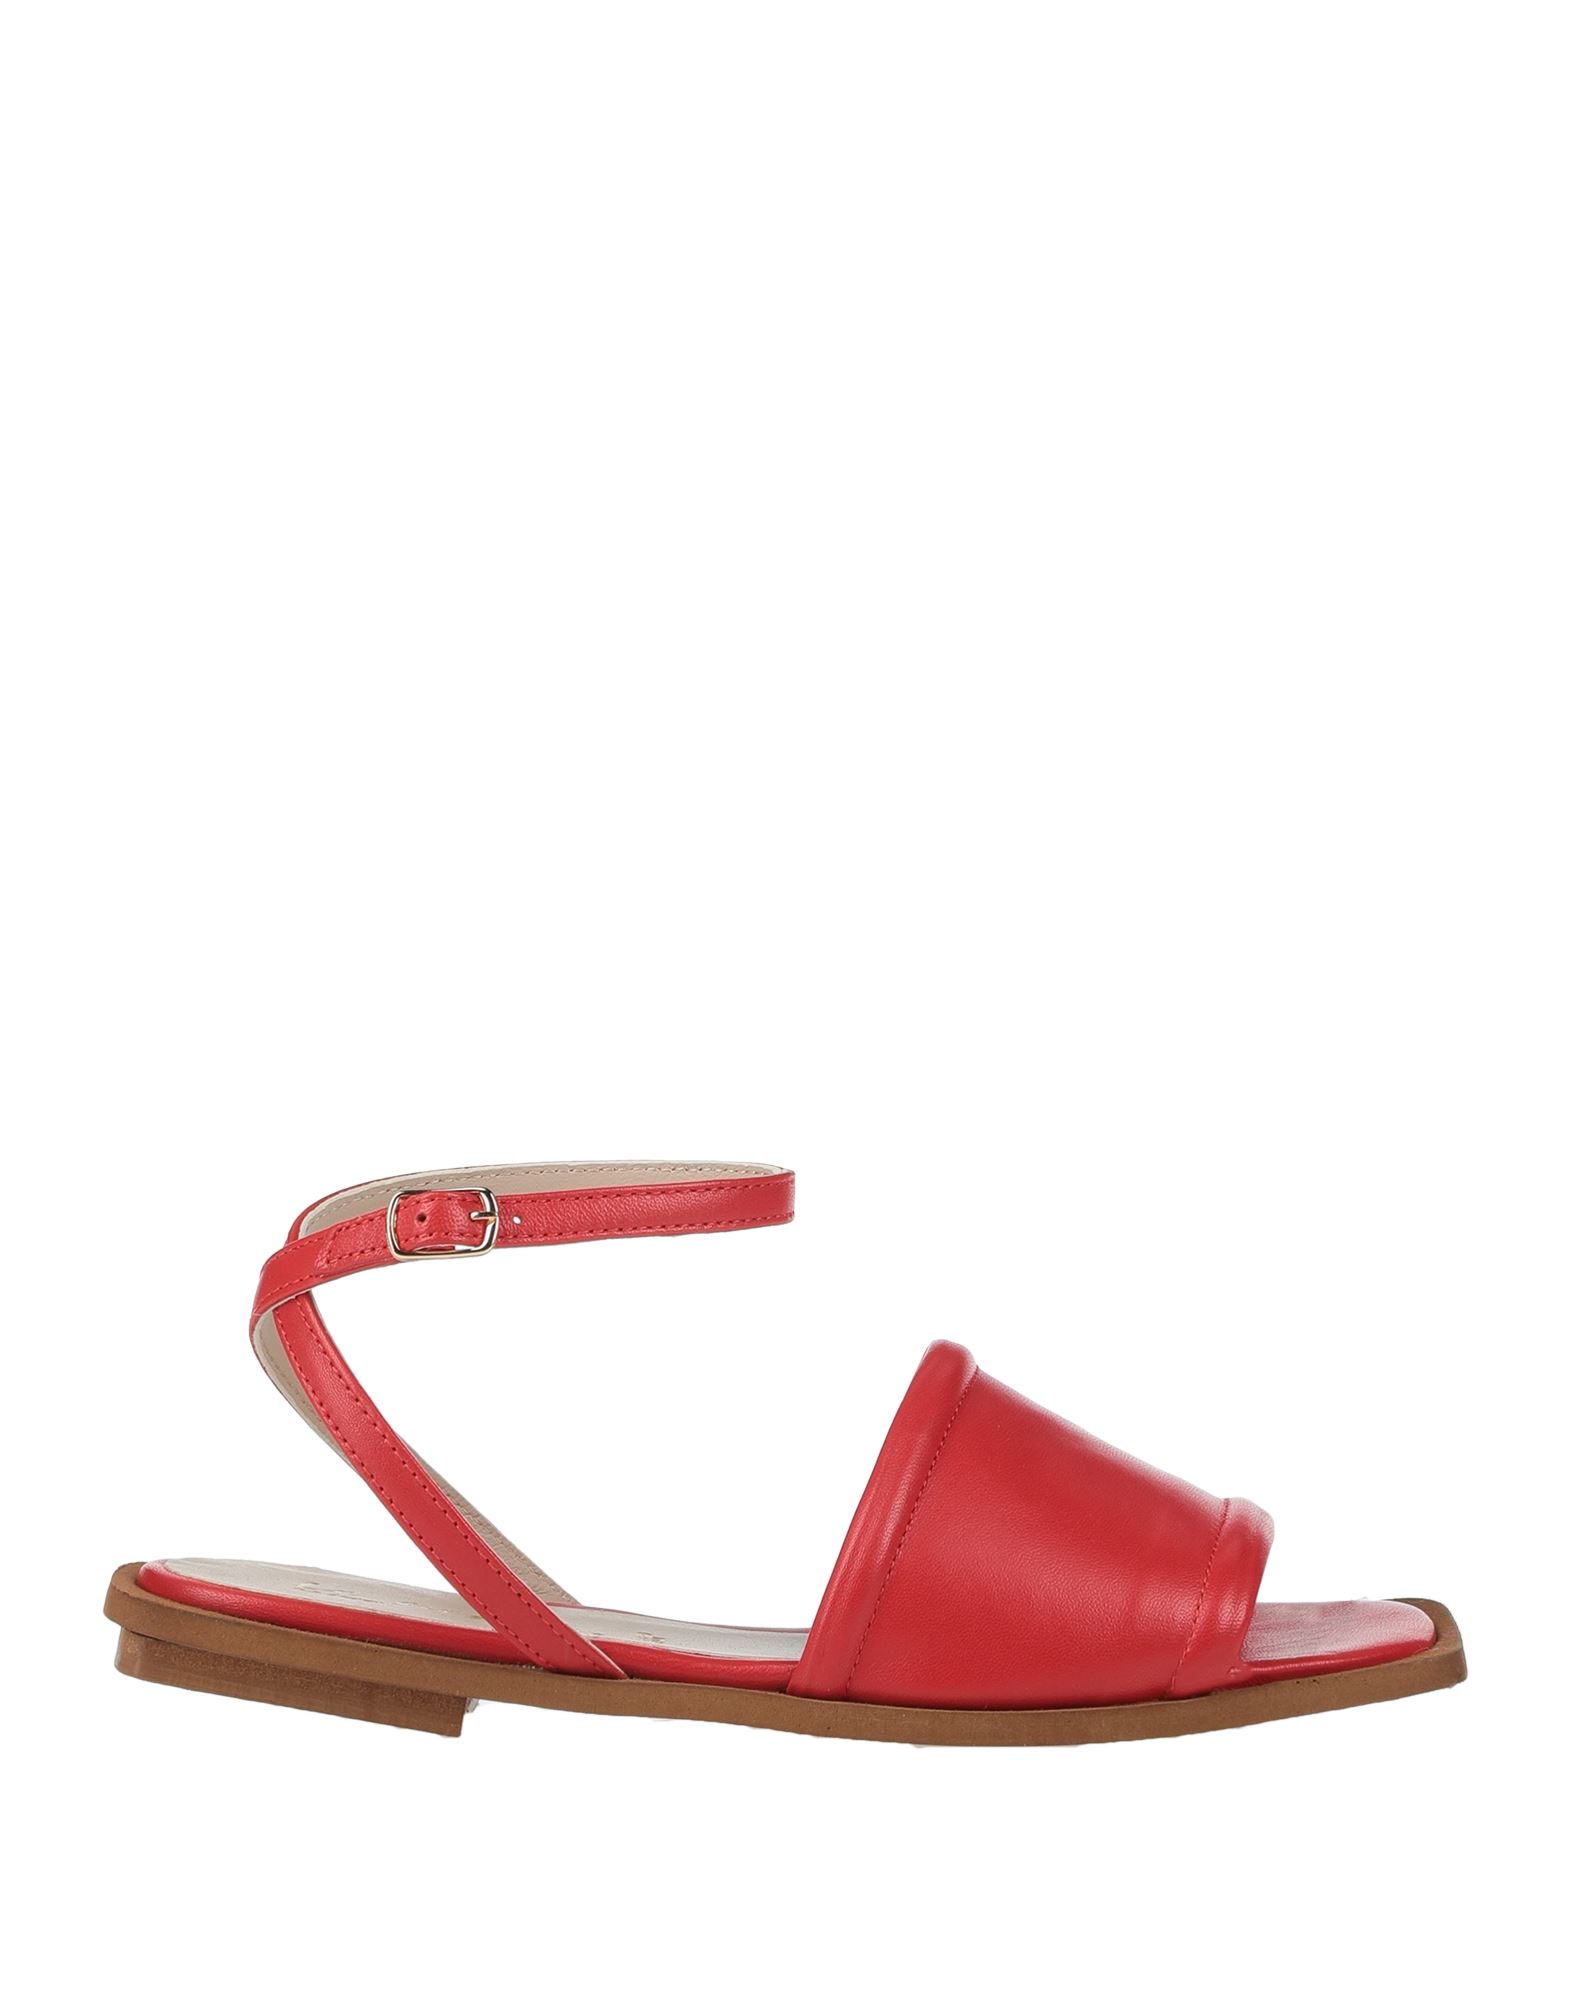 Le Pepite Sandals In Red